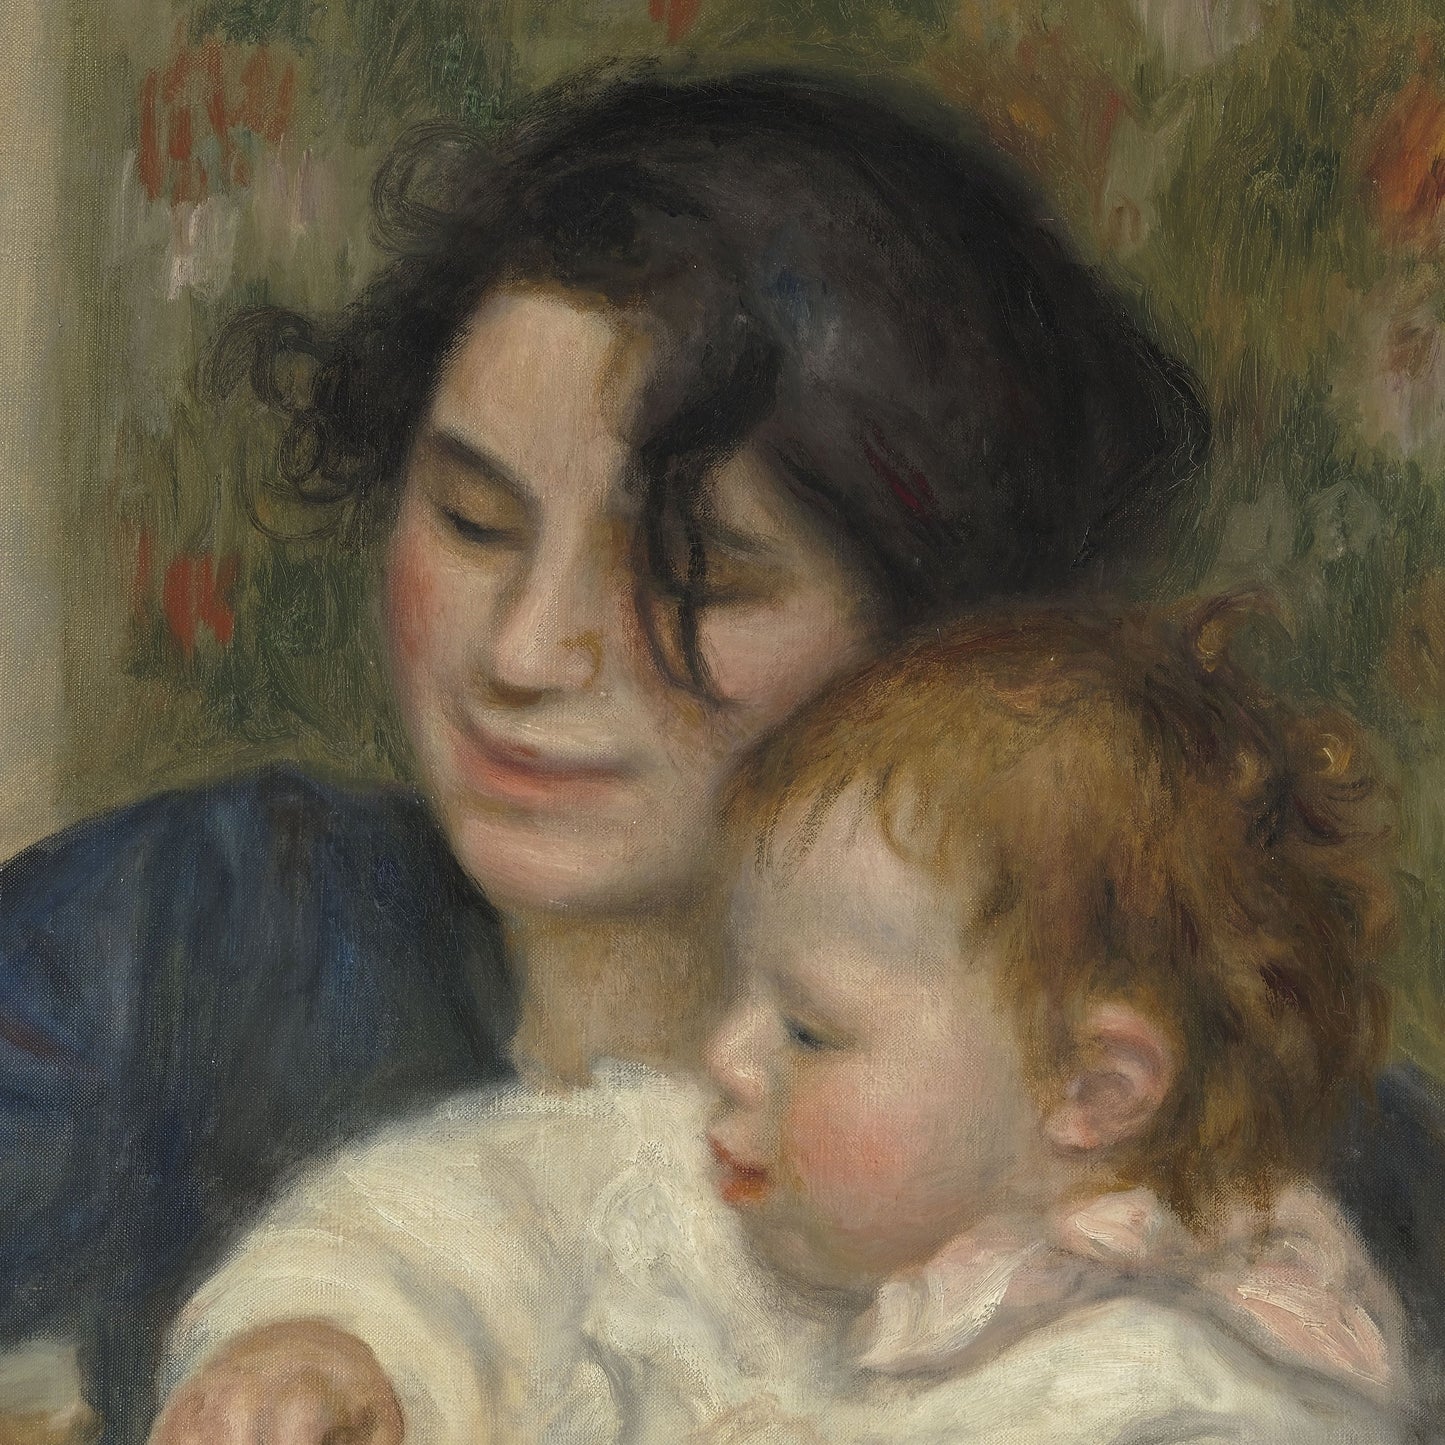 Gabrielle and Jean by Pierre Auguste Renoir, 3d Printed with texture and brush strokes looks like original oil-painting, code:281